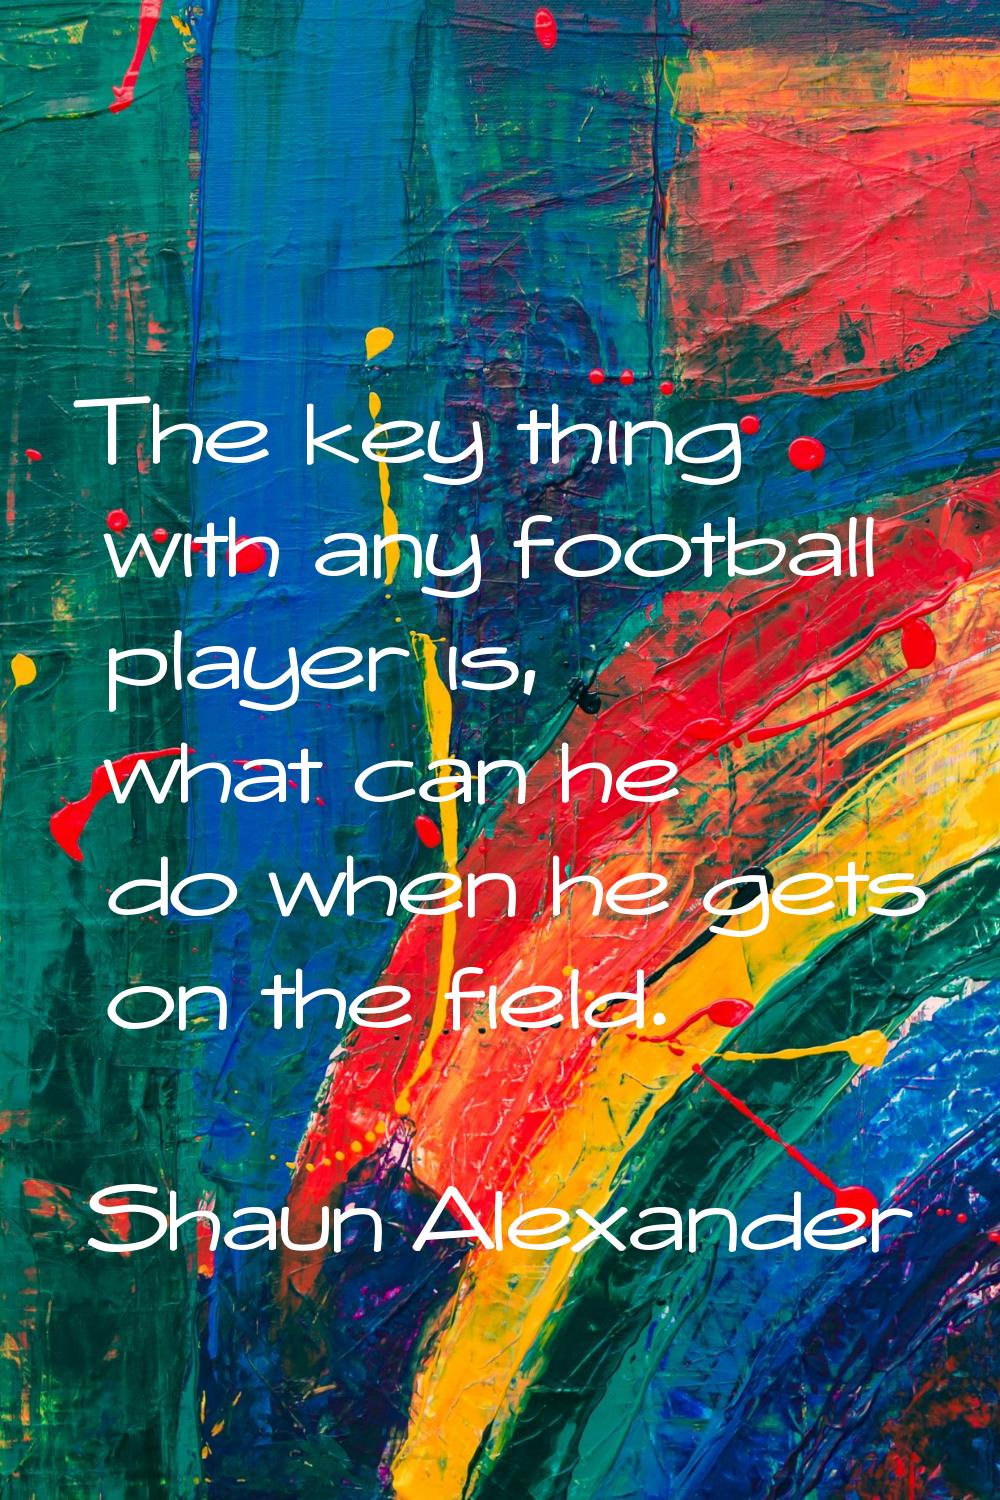 The key thing with any football player is, what can he do when he gets on the field.